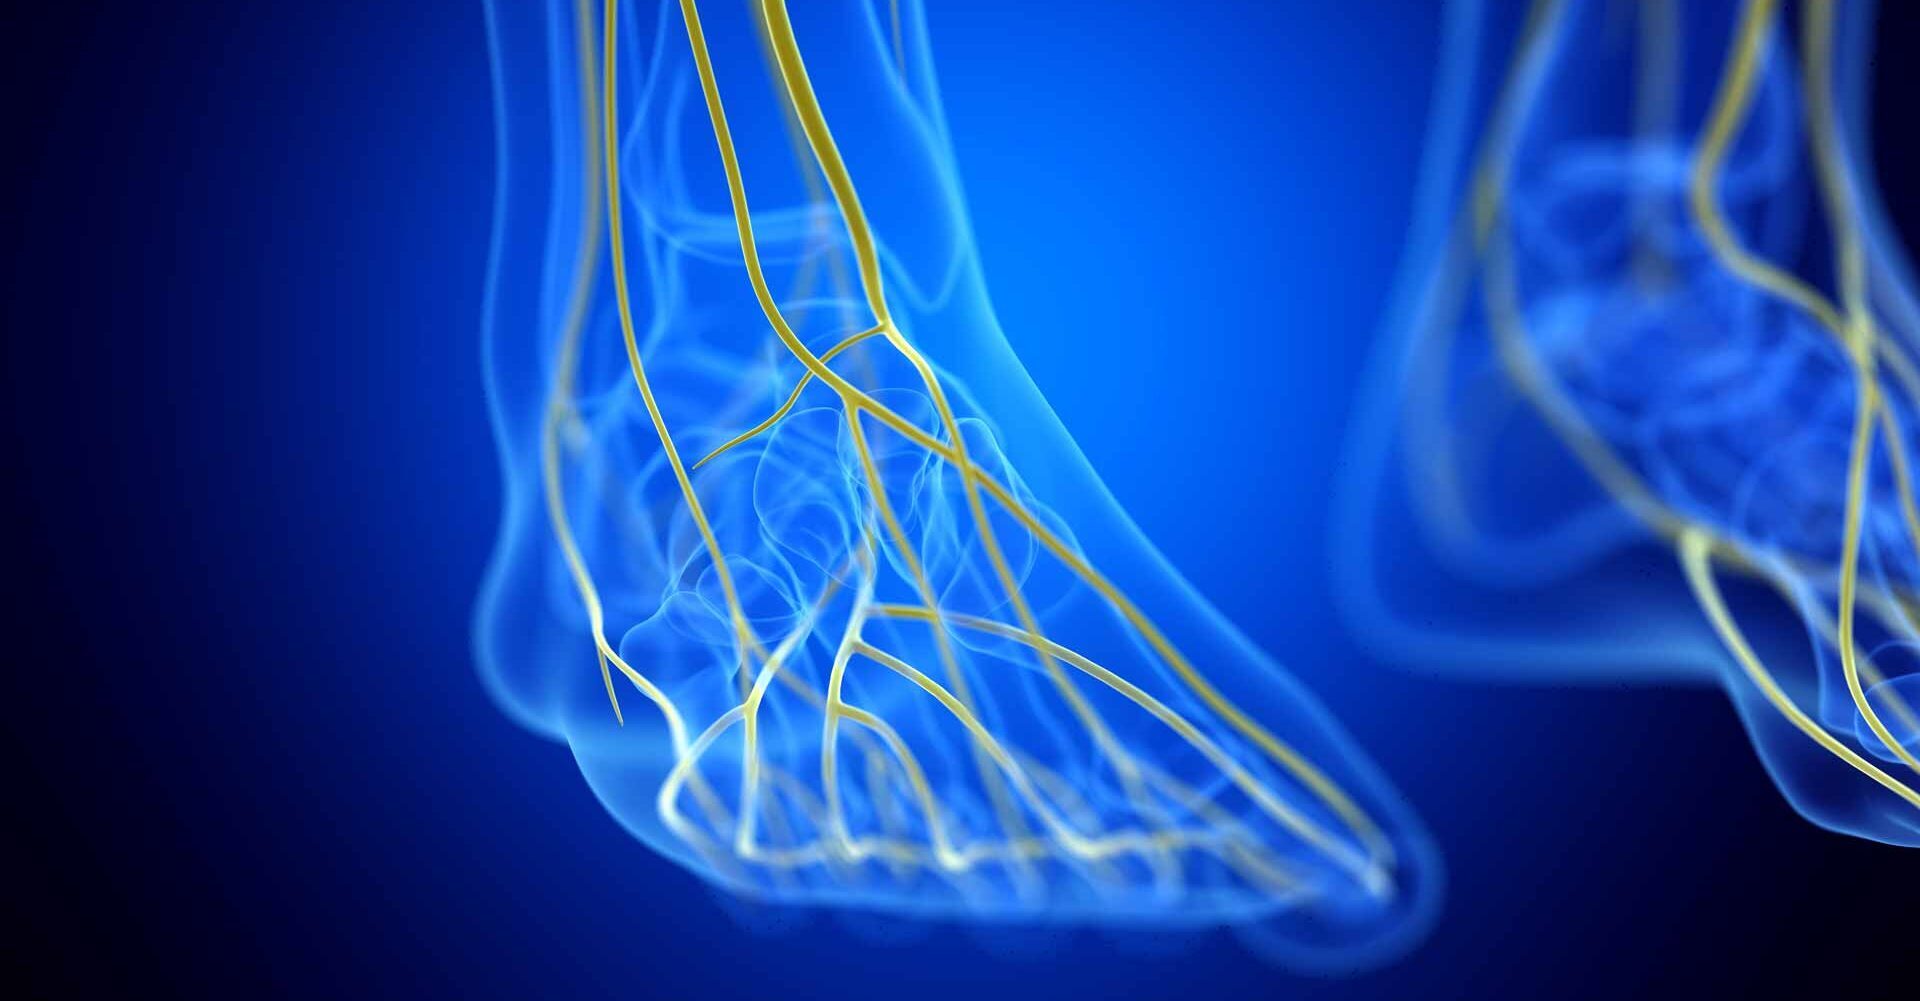 A three-dimensional (3D) rendering of a human foot with blue-colored nerves on a light blue background. The nerves branch out from the ankle and spread across the top and sole of the foot.